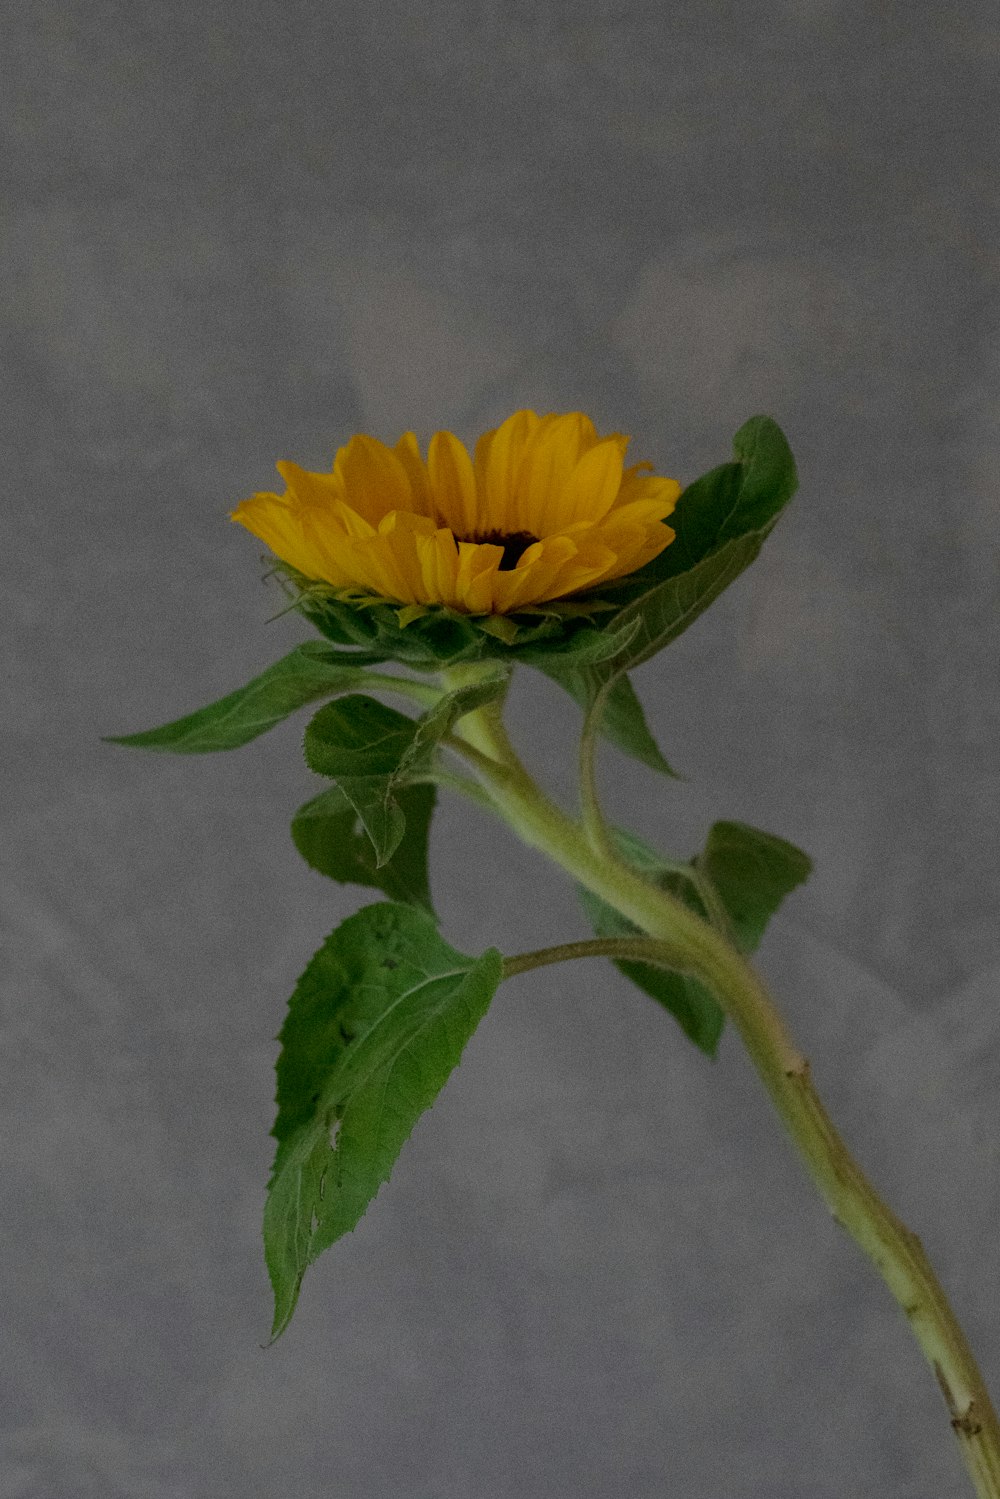 a single sunflower with green leaves on a gray background